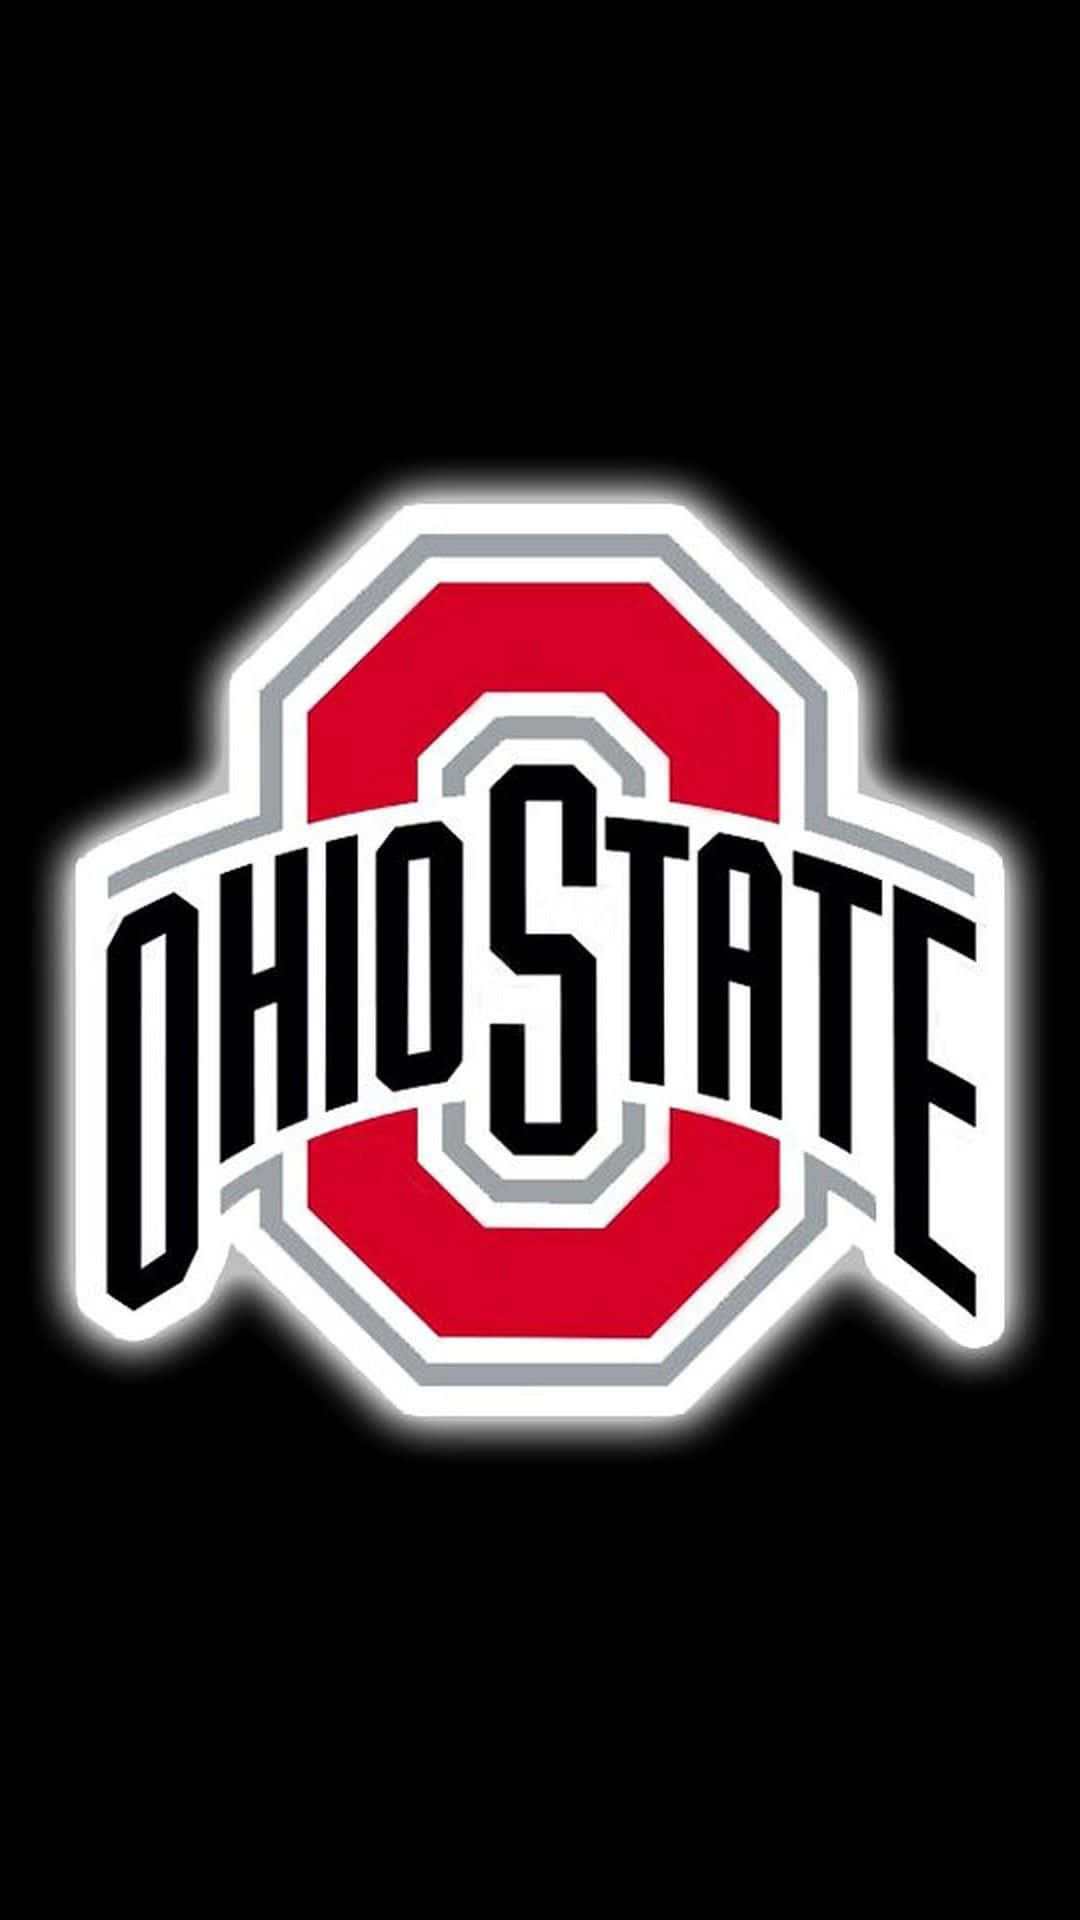 Proudly display your Buckeye pride with Ohio State Iphone wallpaper Wallpaper